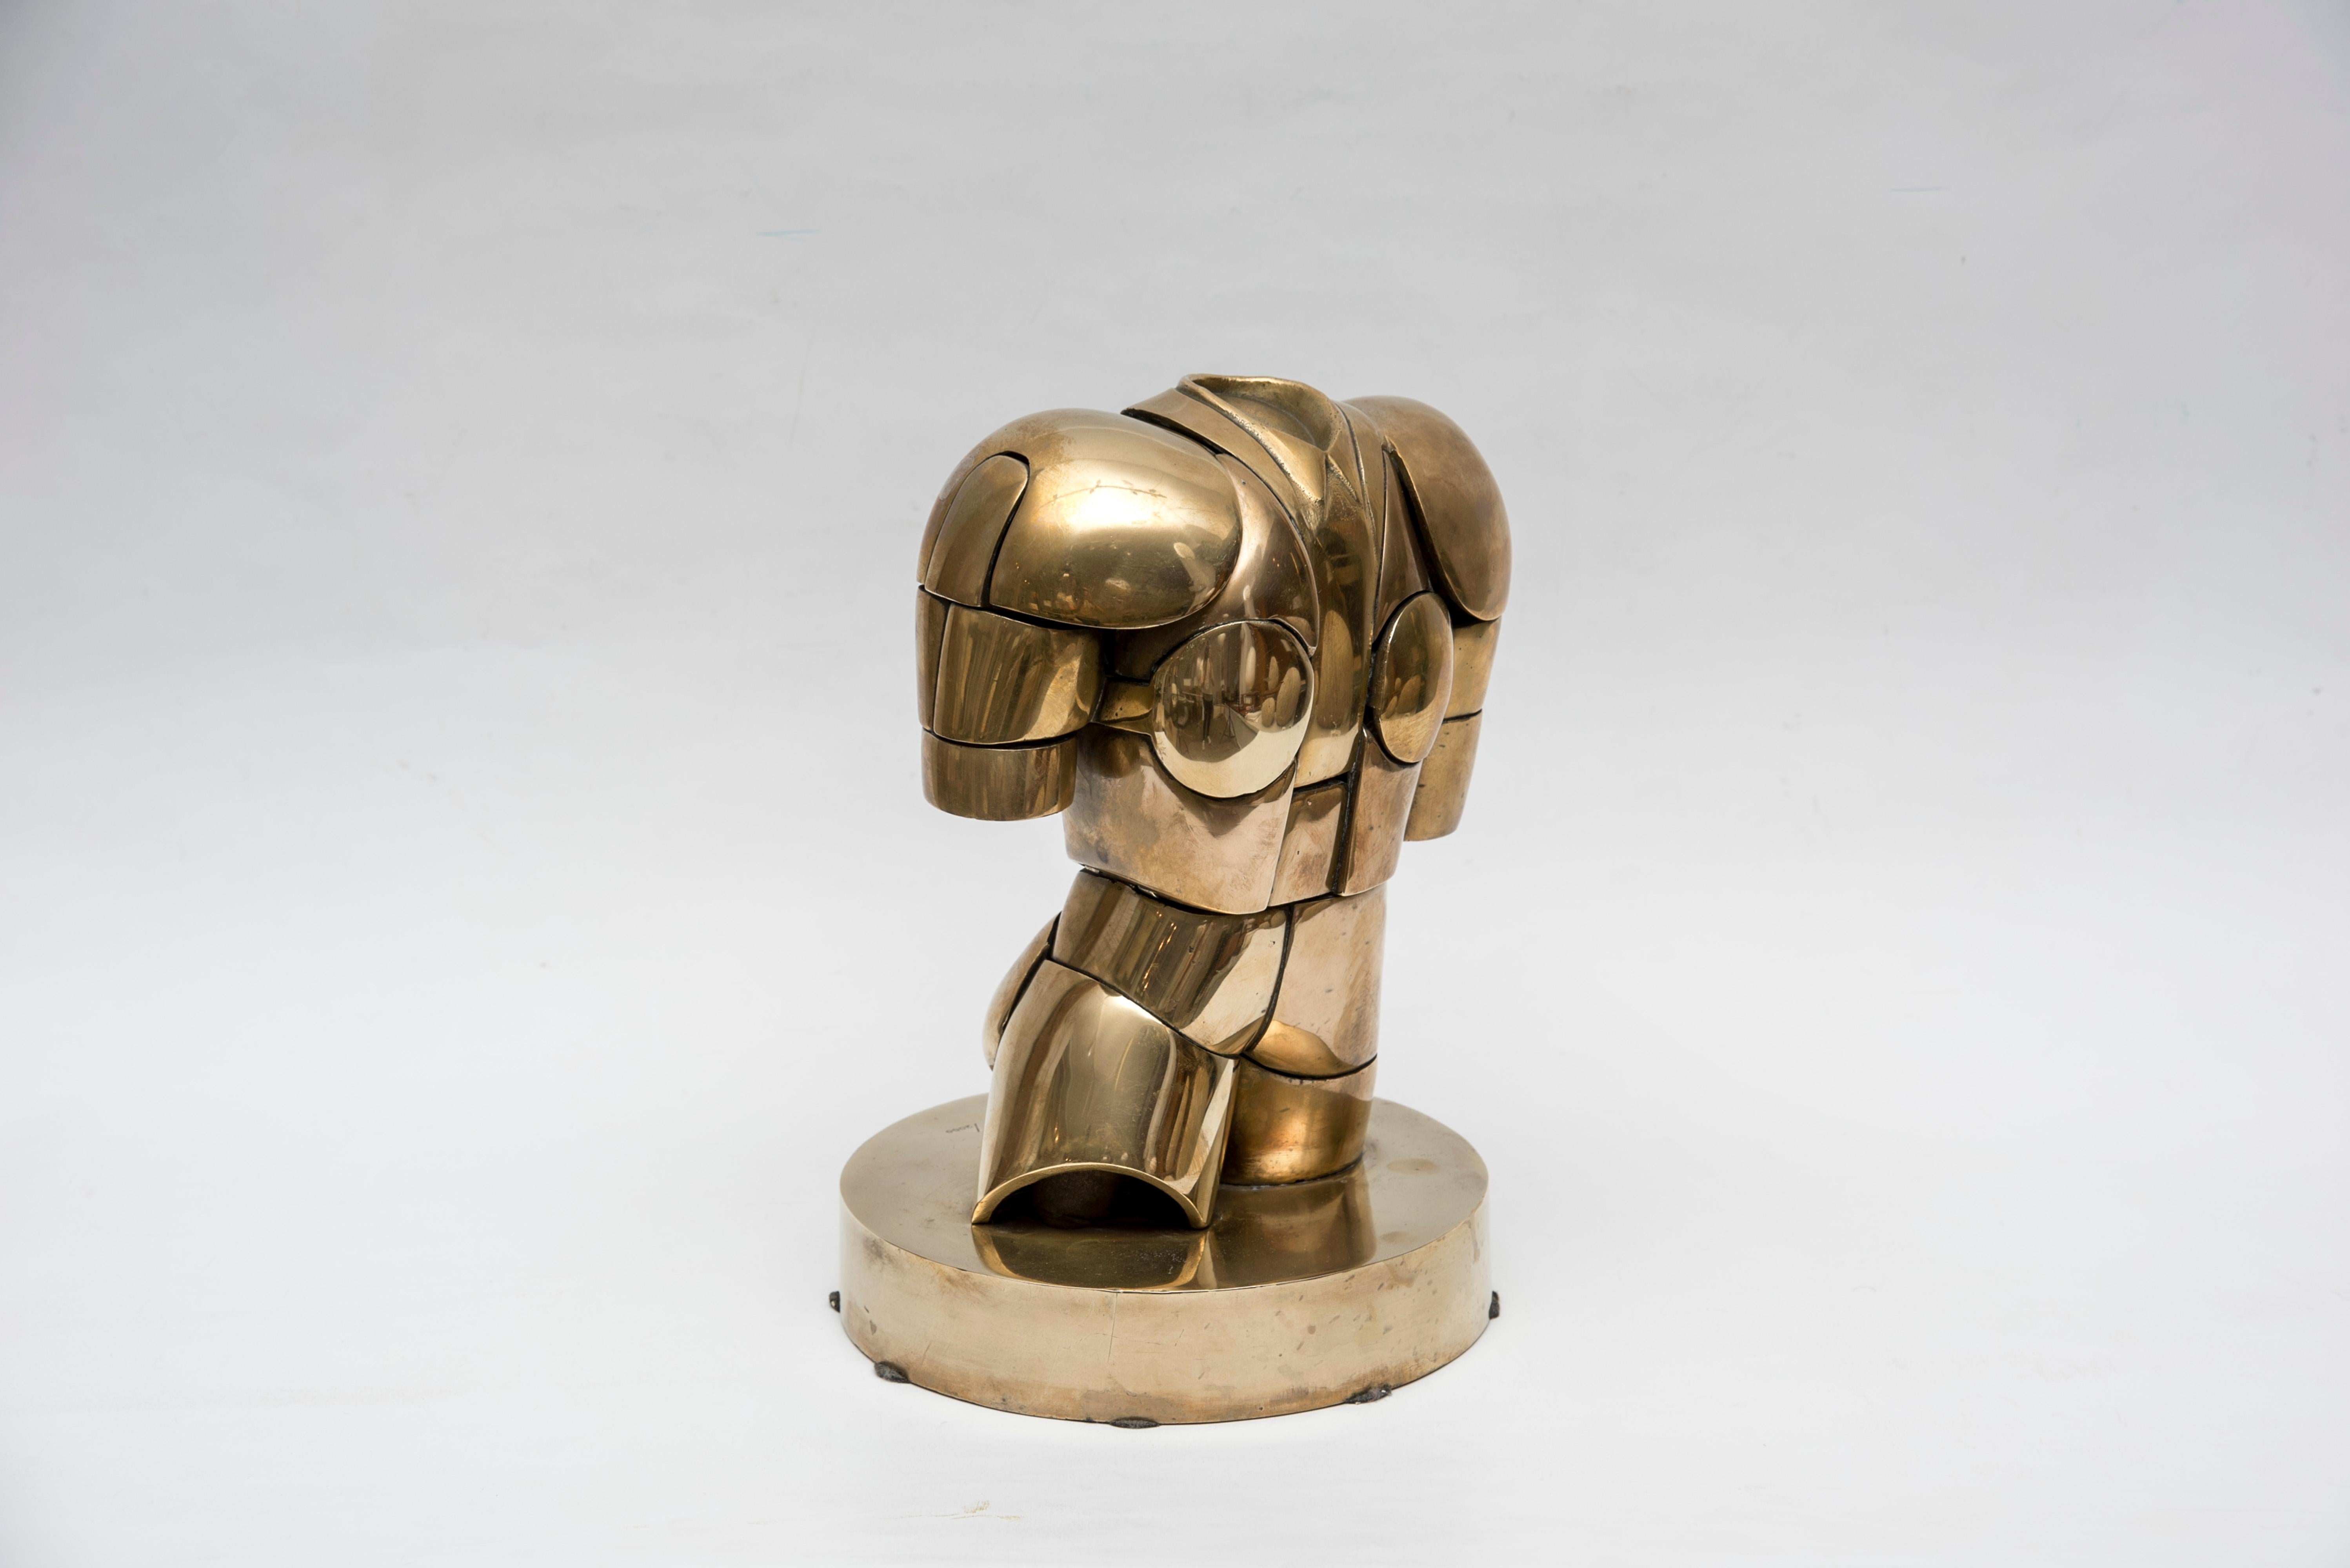 Torero model, 1972

Sculpture consisting of of 18 articulated and dismountable elements.
Polished brass
Signed and numbered 1328/2000 on the base.

Measures: Diameter 7.9 / 8.7 in. Height 11.2 in.